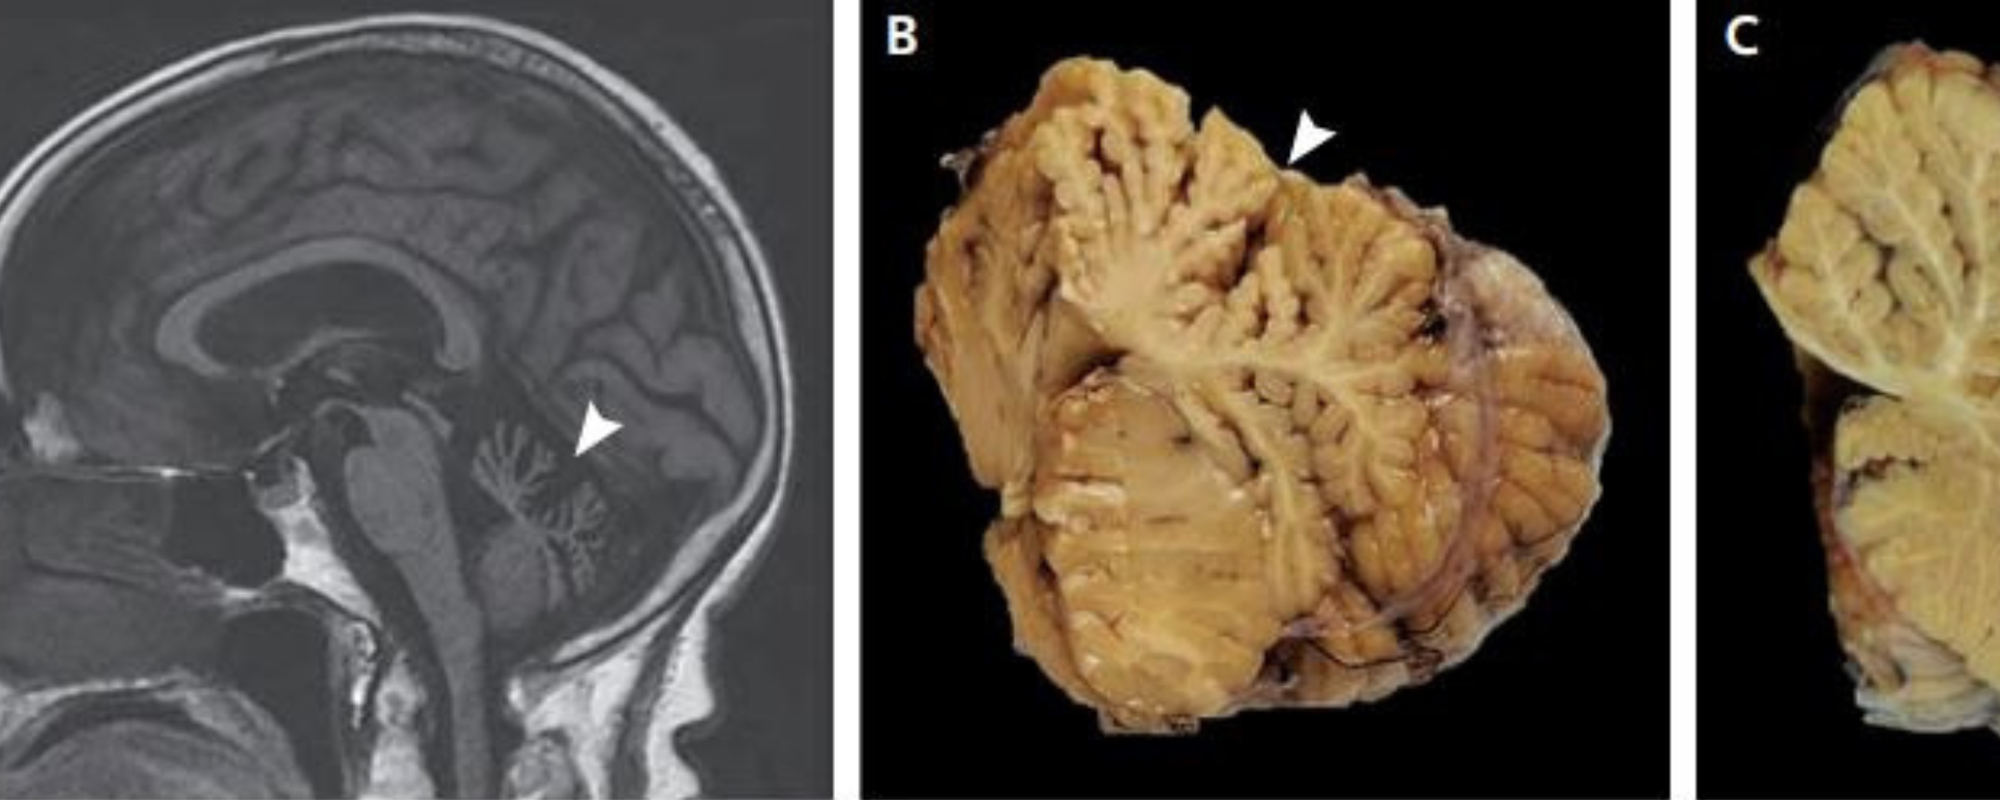 Genetic Anomaly Behind Common Late-Onset Cerebellar Ataxia